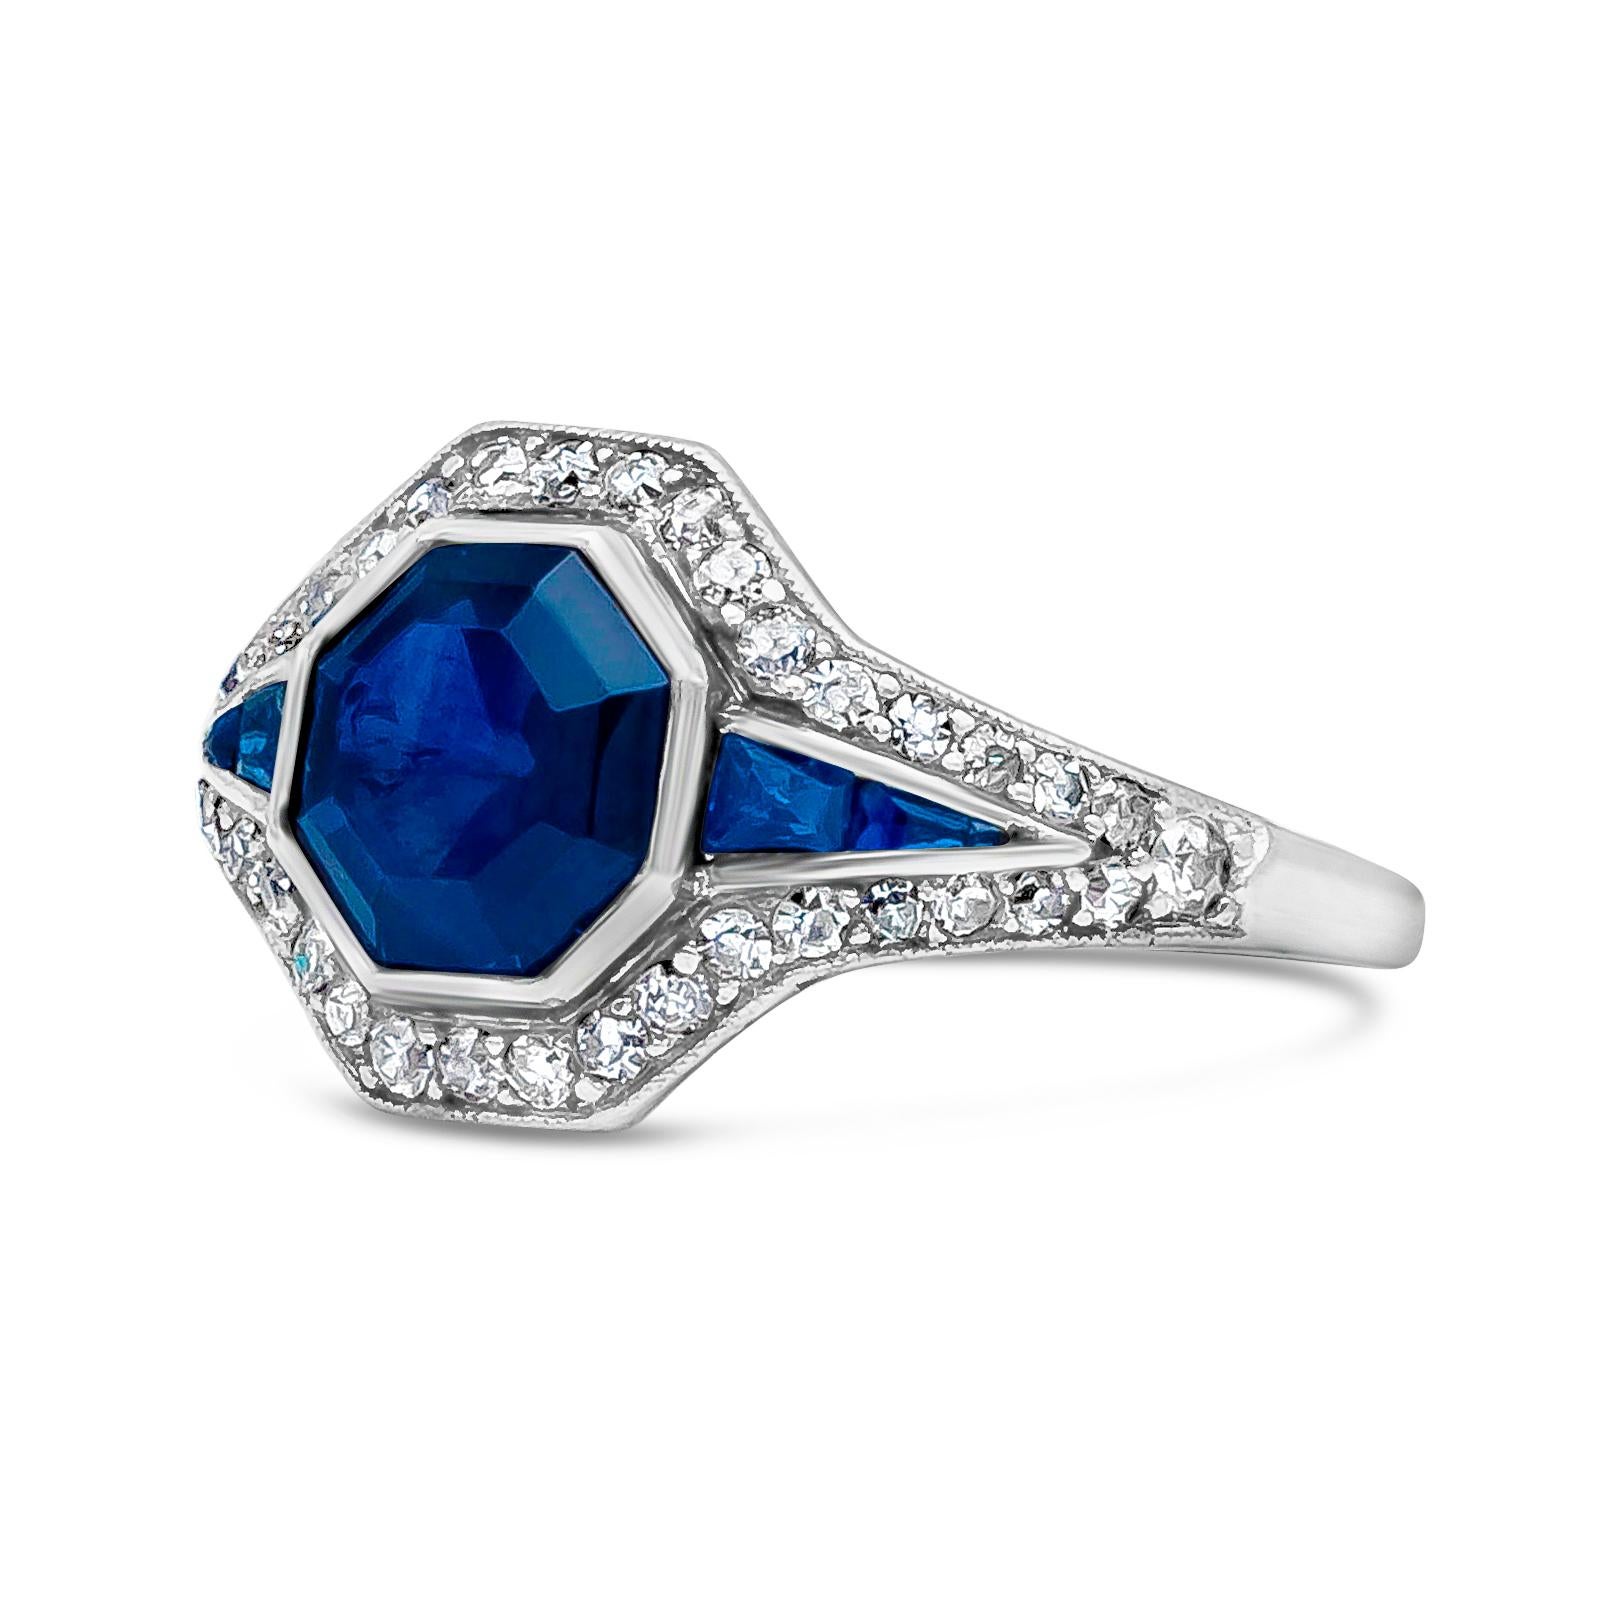 A stunning antique inspired gemstone engagement ring, featuring a 1.53 carats Asscher cut blue sapphire, flanked by tapered baguette shaped blue sapphires weighing 0.08 carats. Surrounded by antique old European cut diamonds weighing 0.30 carats